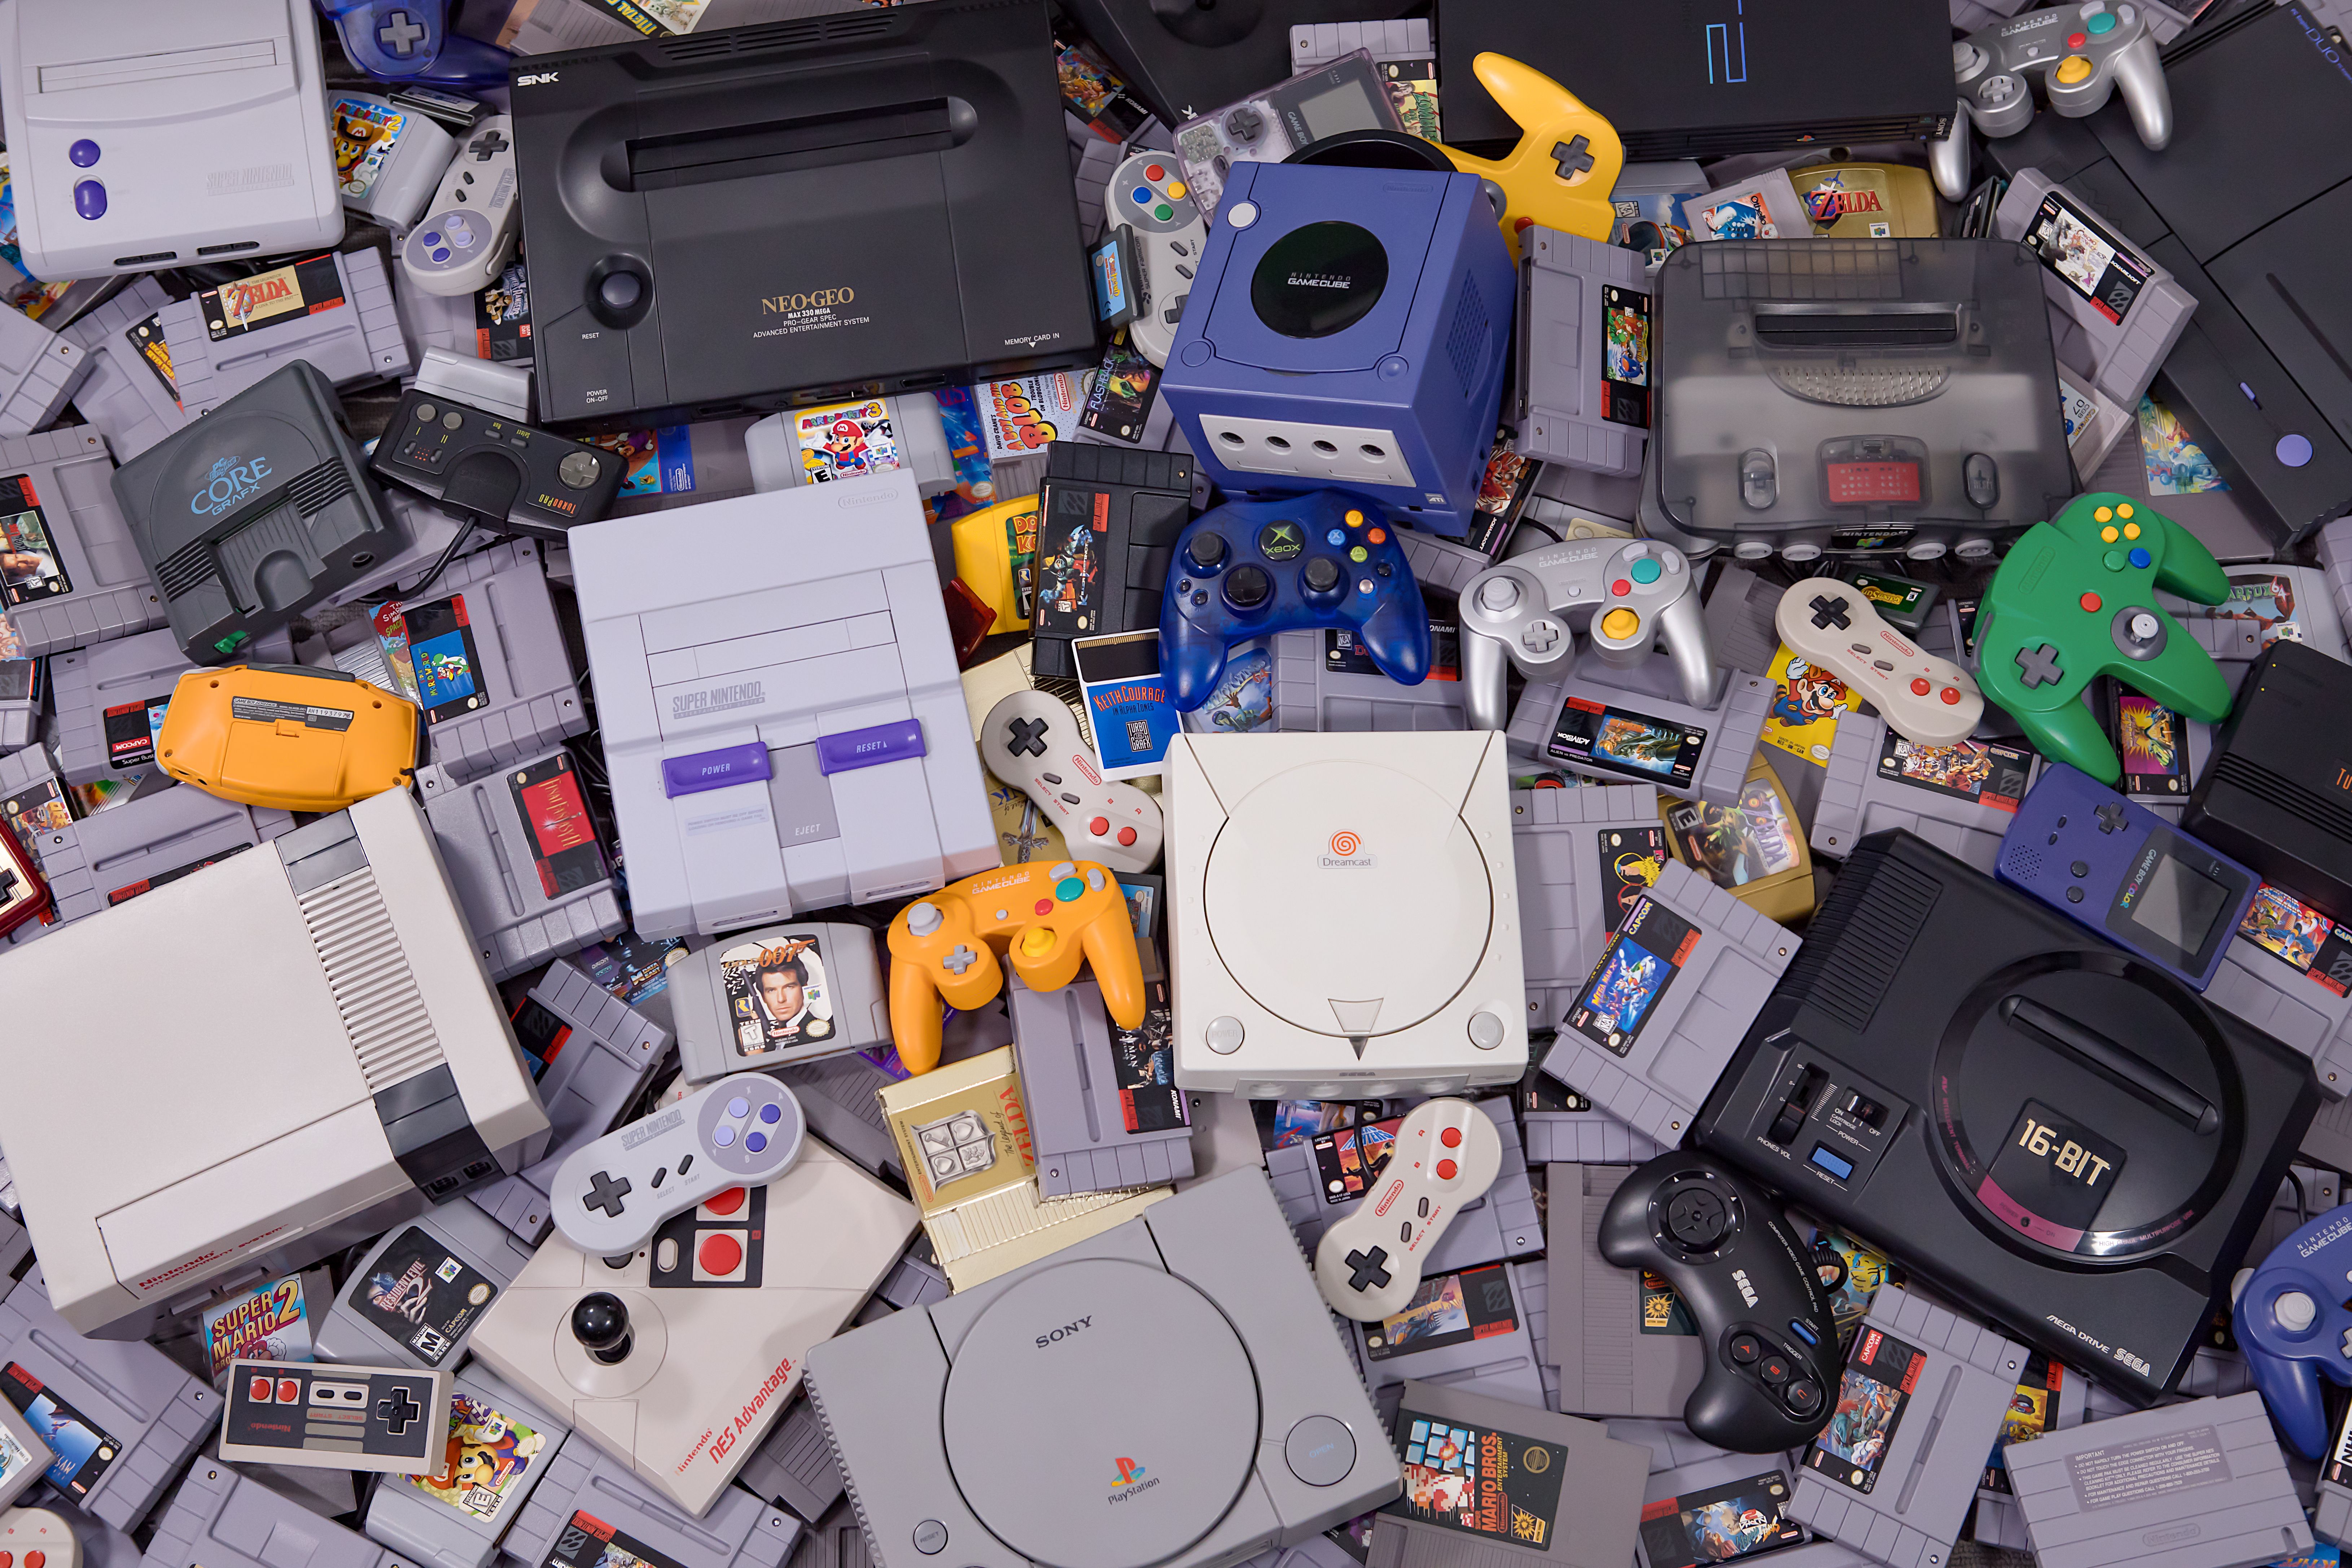 A studio shot of many different old video game systems, controllers and game cartridges shot from above.